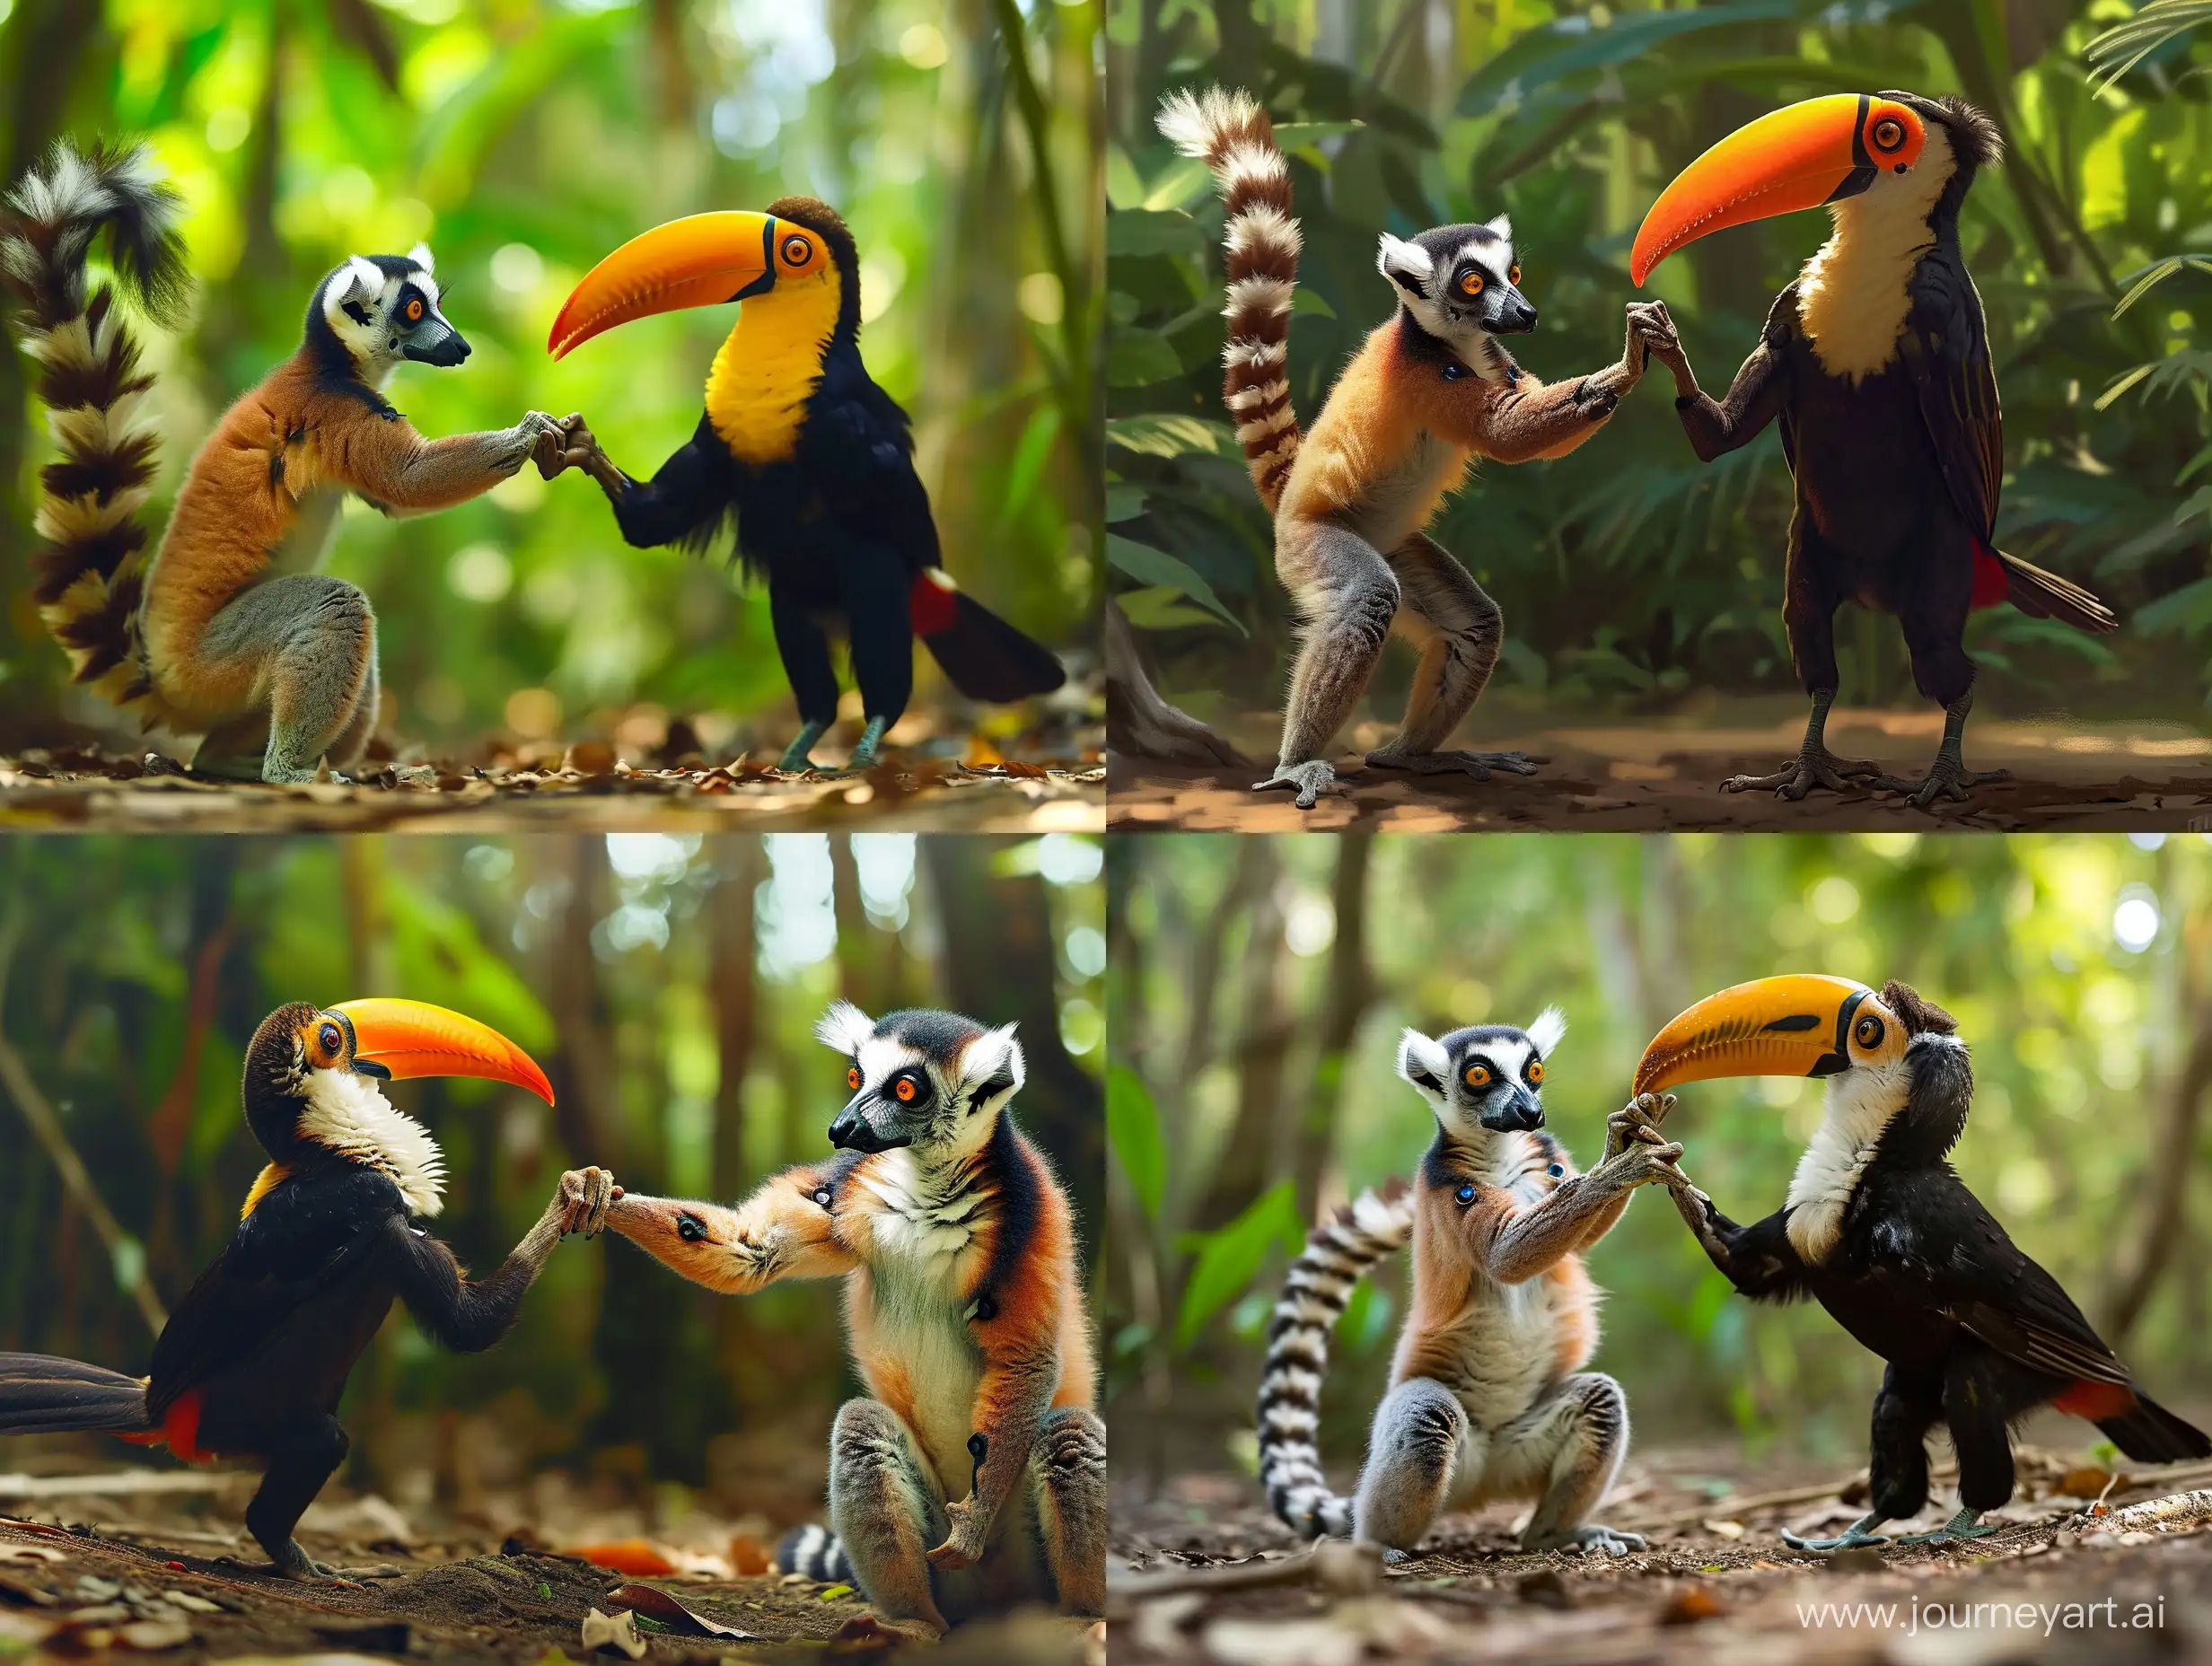 imagine a toucan bird holding hands with a lemur in the forest 